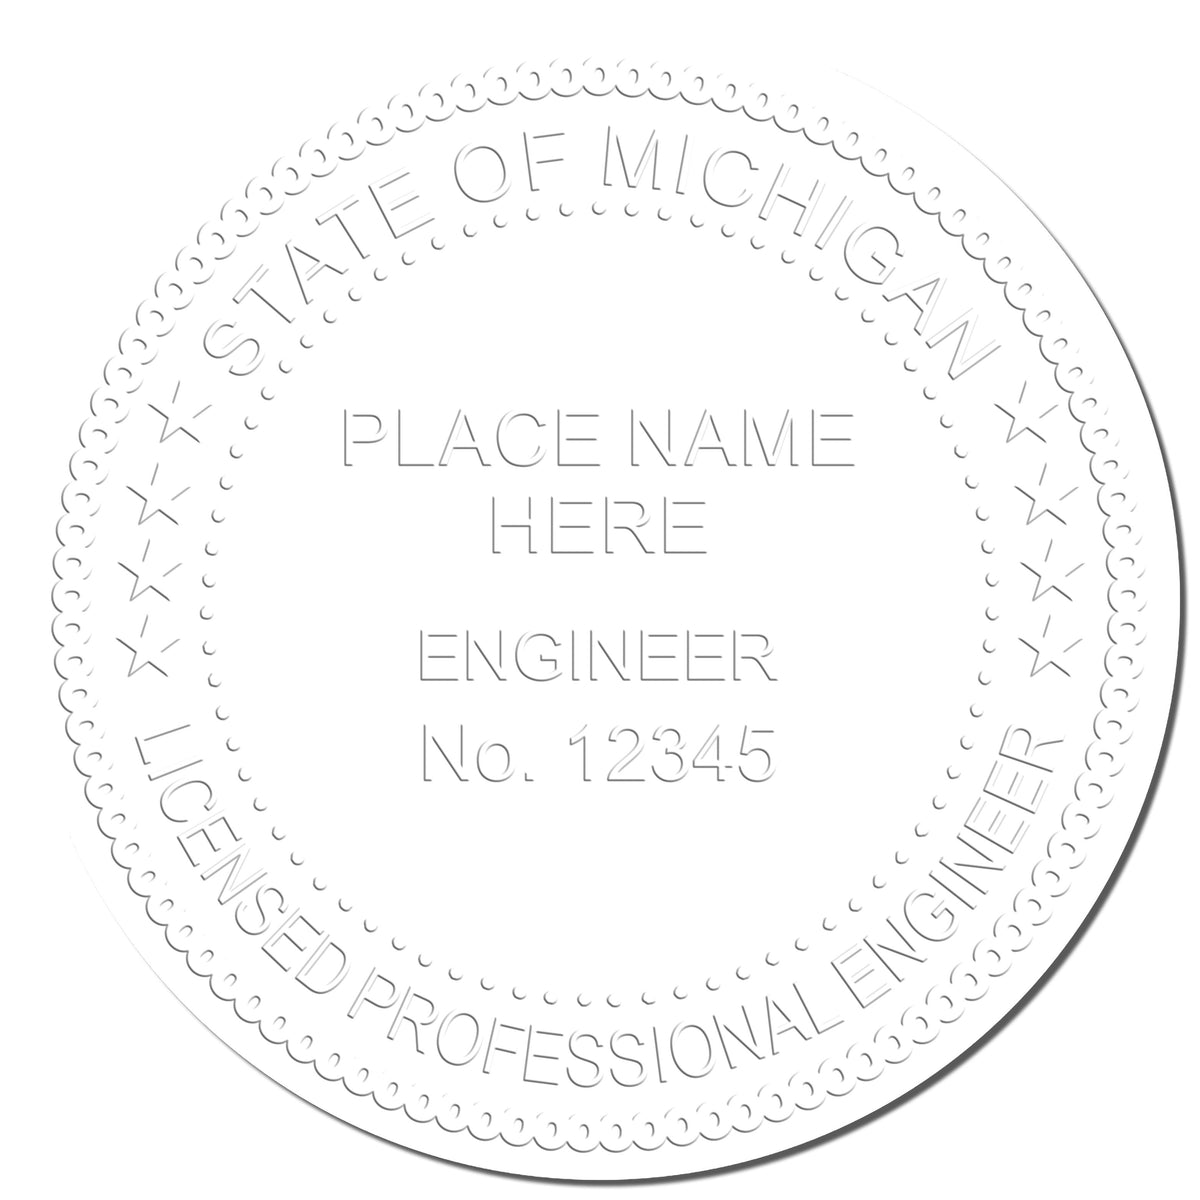 This paper is stamped with a sample imprint of the State of Michigan Extended Long Reach Engineer Seal, signifying its quality and reliability.